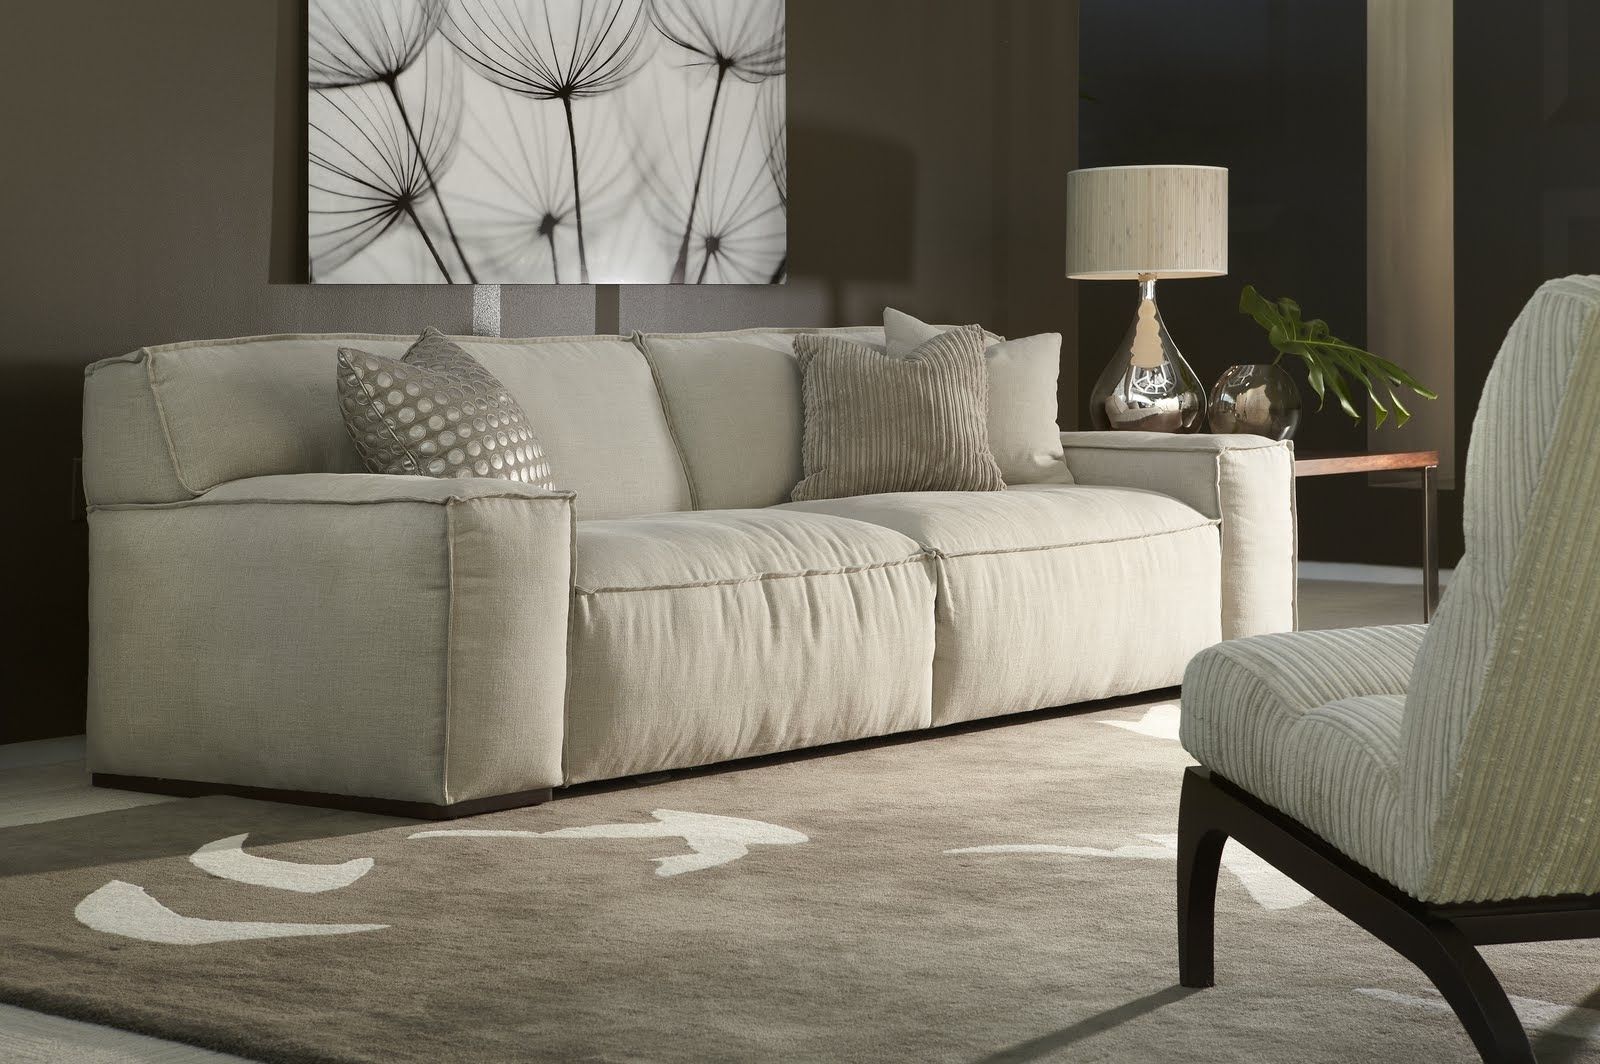 Sectional Sofa Design: Down Sectional Sofa Blend Wrapped Goose For Down Feather Sectional Sofas (View 3 of 10)